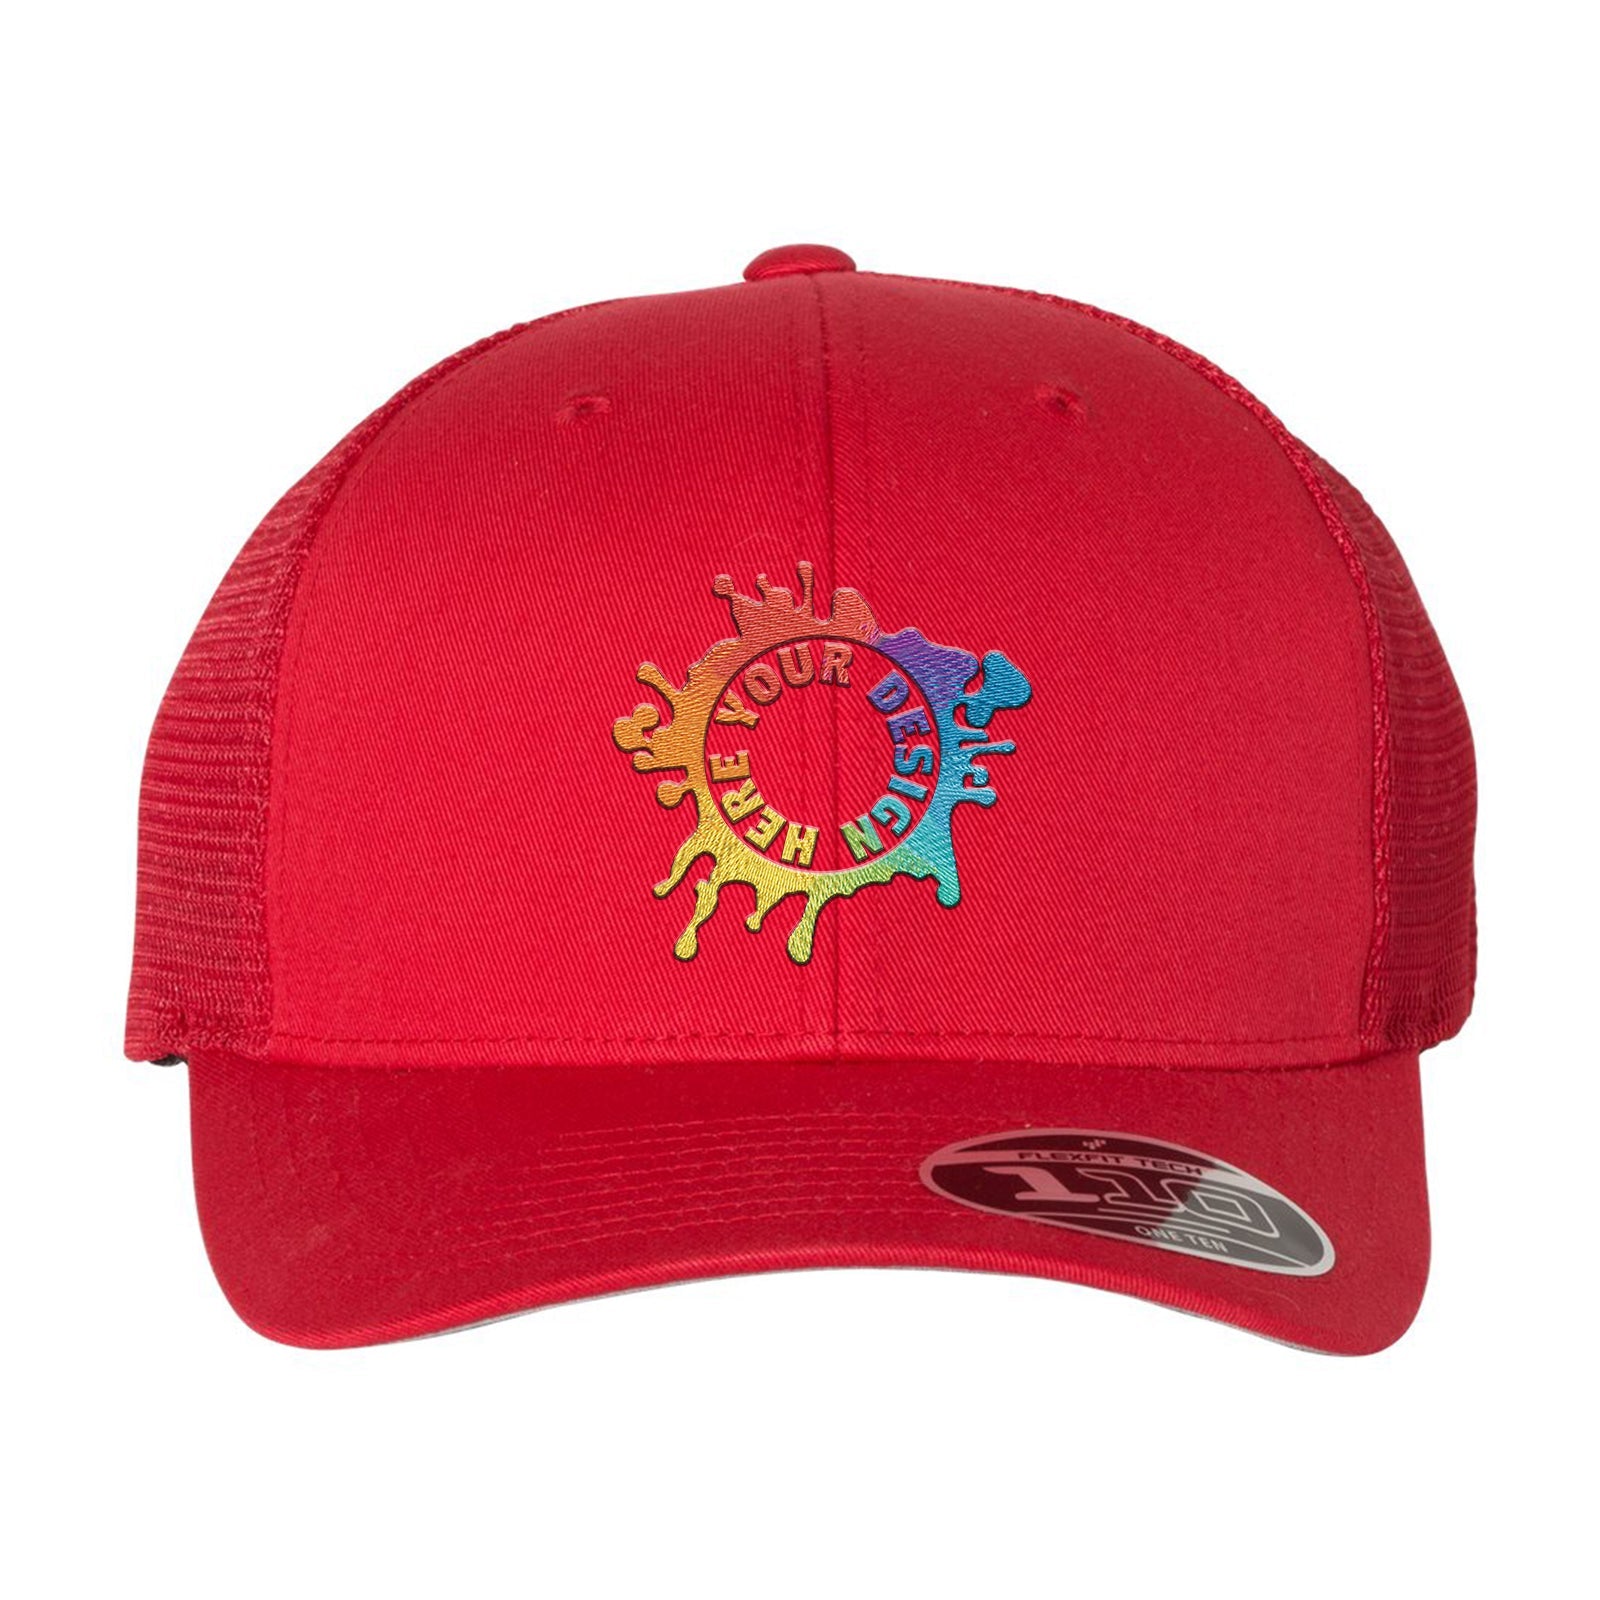 Huk Fishing Hat Cap Fitted L/XL Mesh Back Red White Embroidered Logo  Lightweight